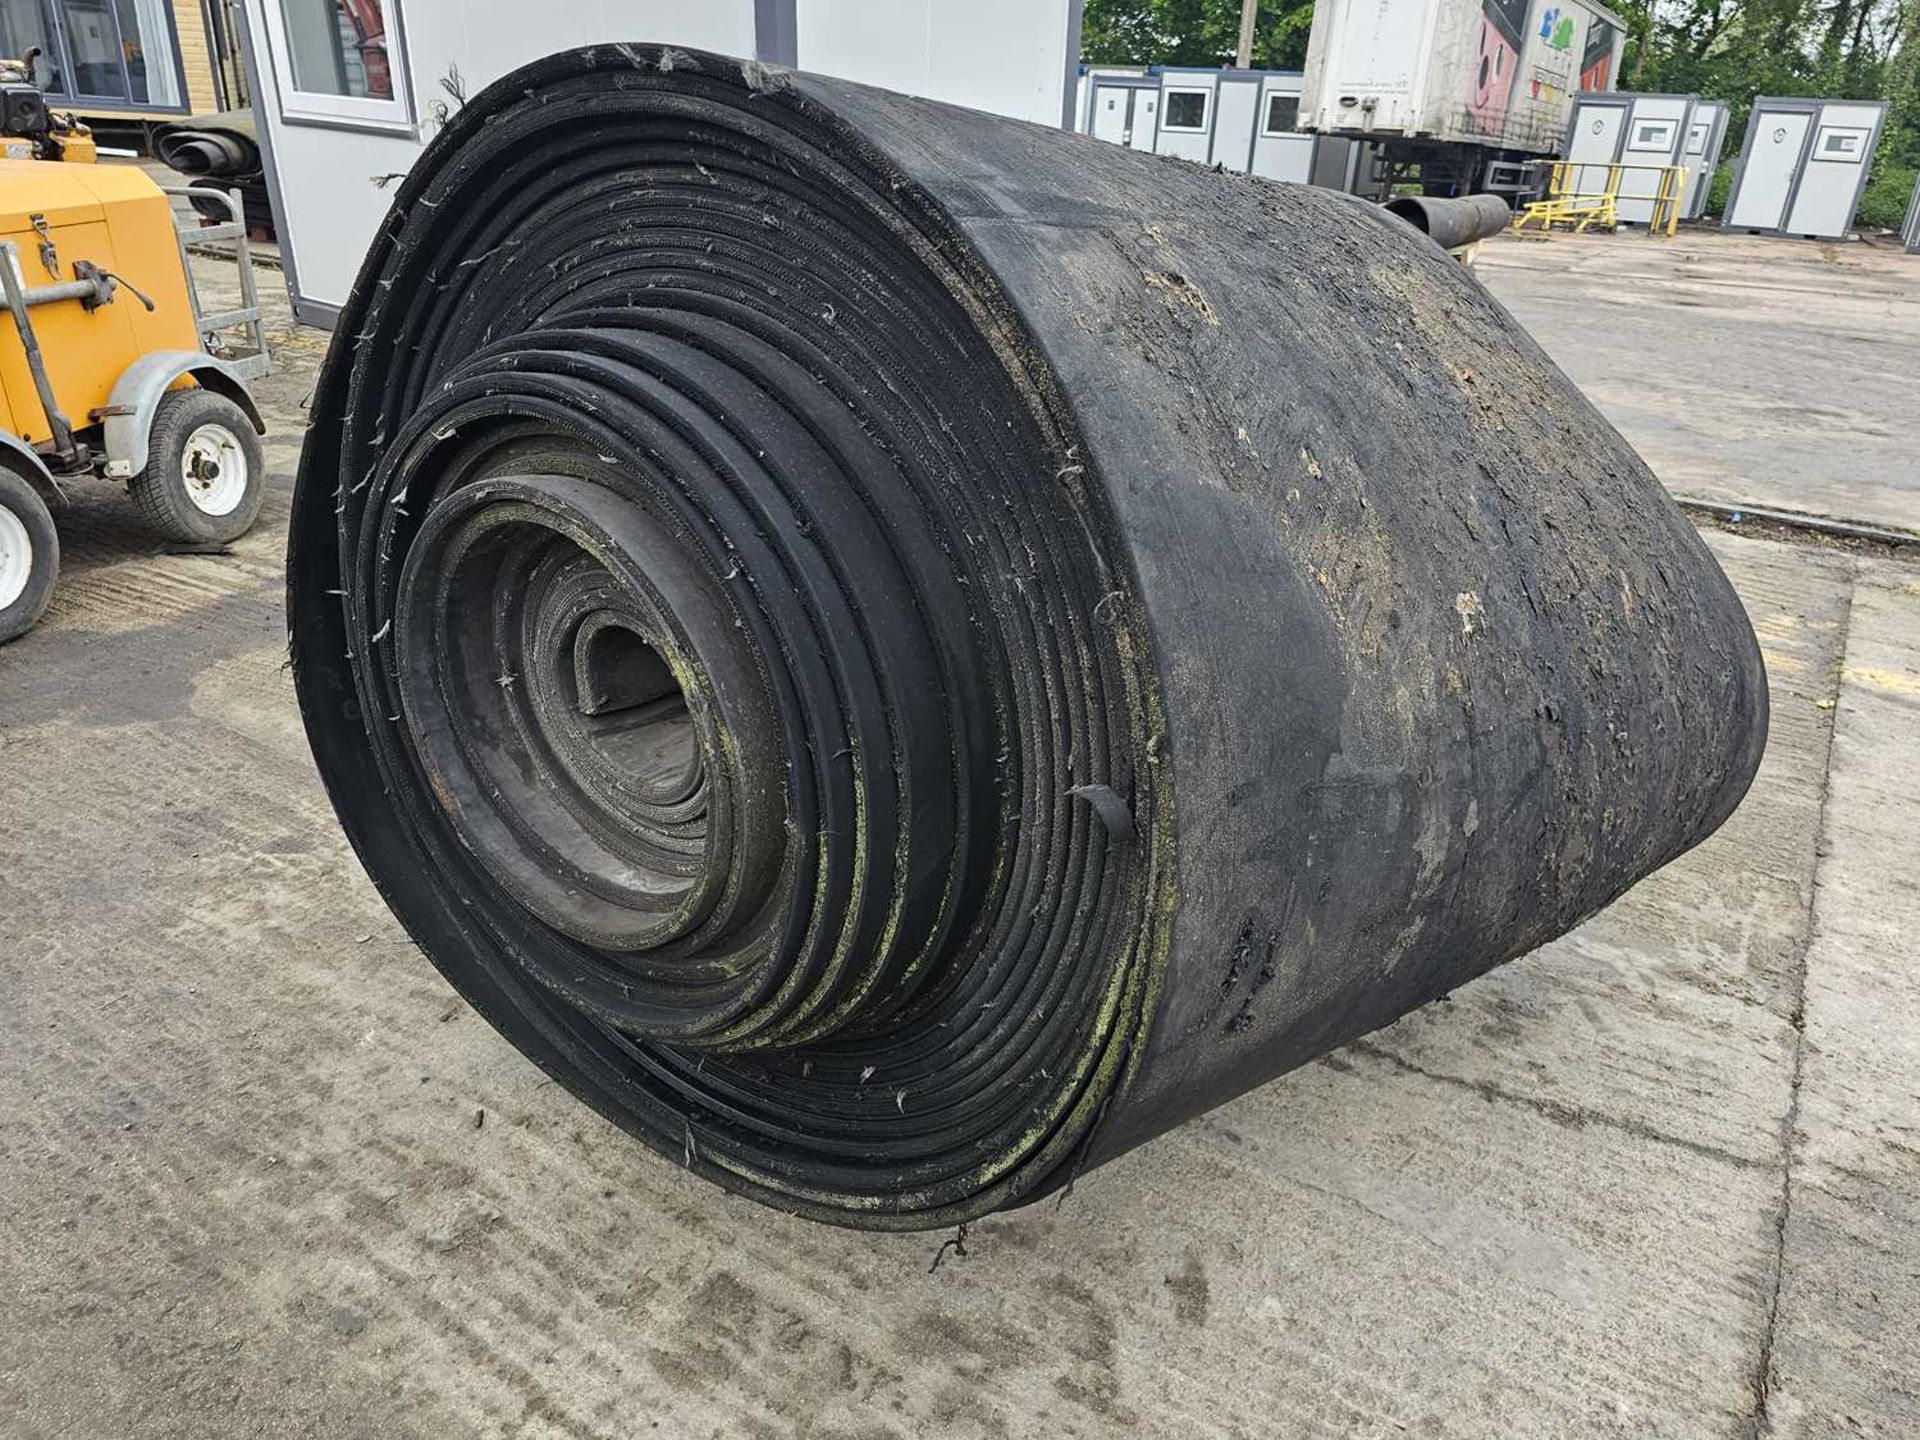 Roll of Rubber Conveyor Belting - Image 2 of 3